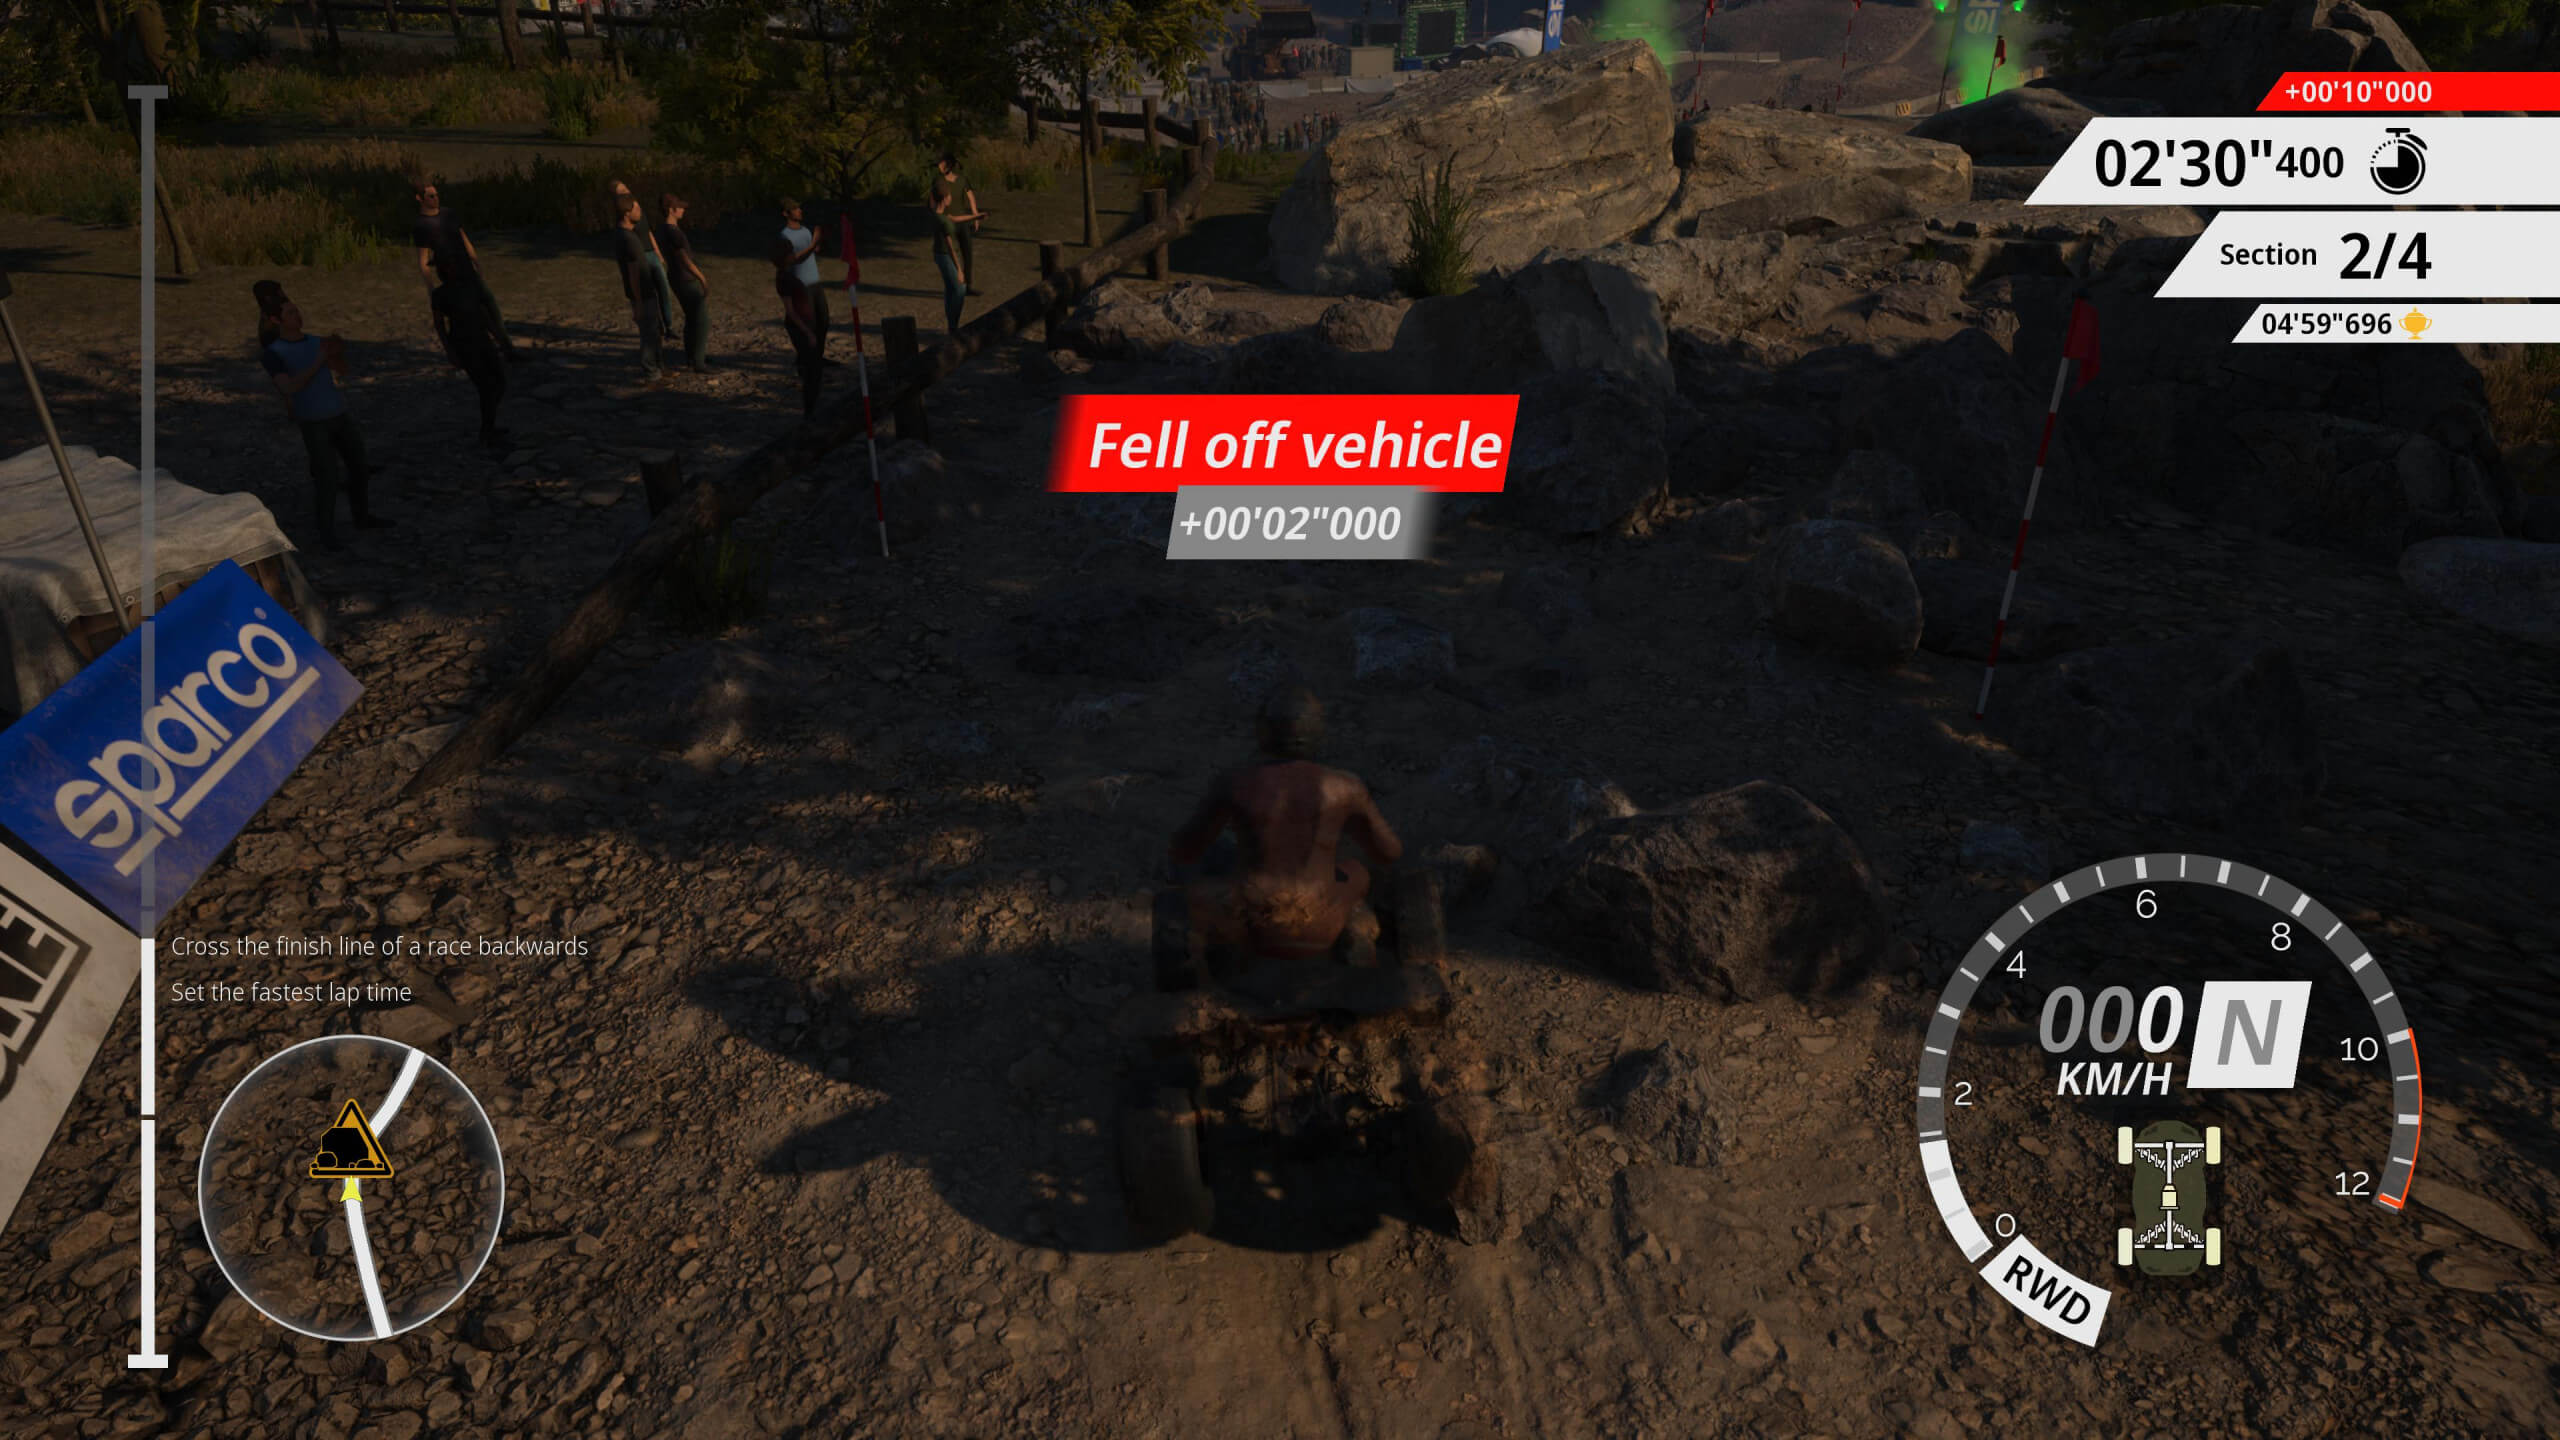 In game screenshot whowing a race timer alongside which section of the track you are on. The player is covered in mud after falling off the vehicle and obtaining a 2 second penalty